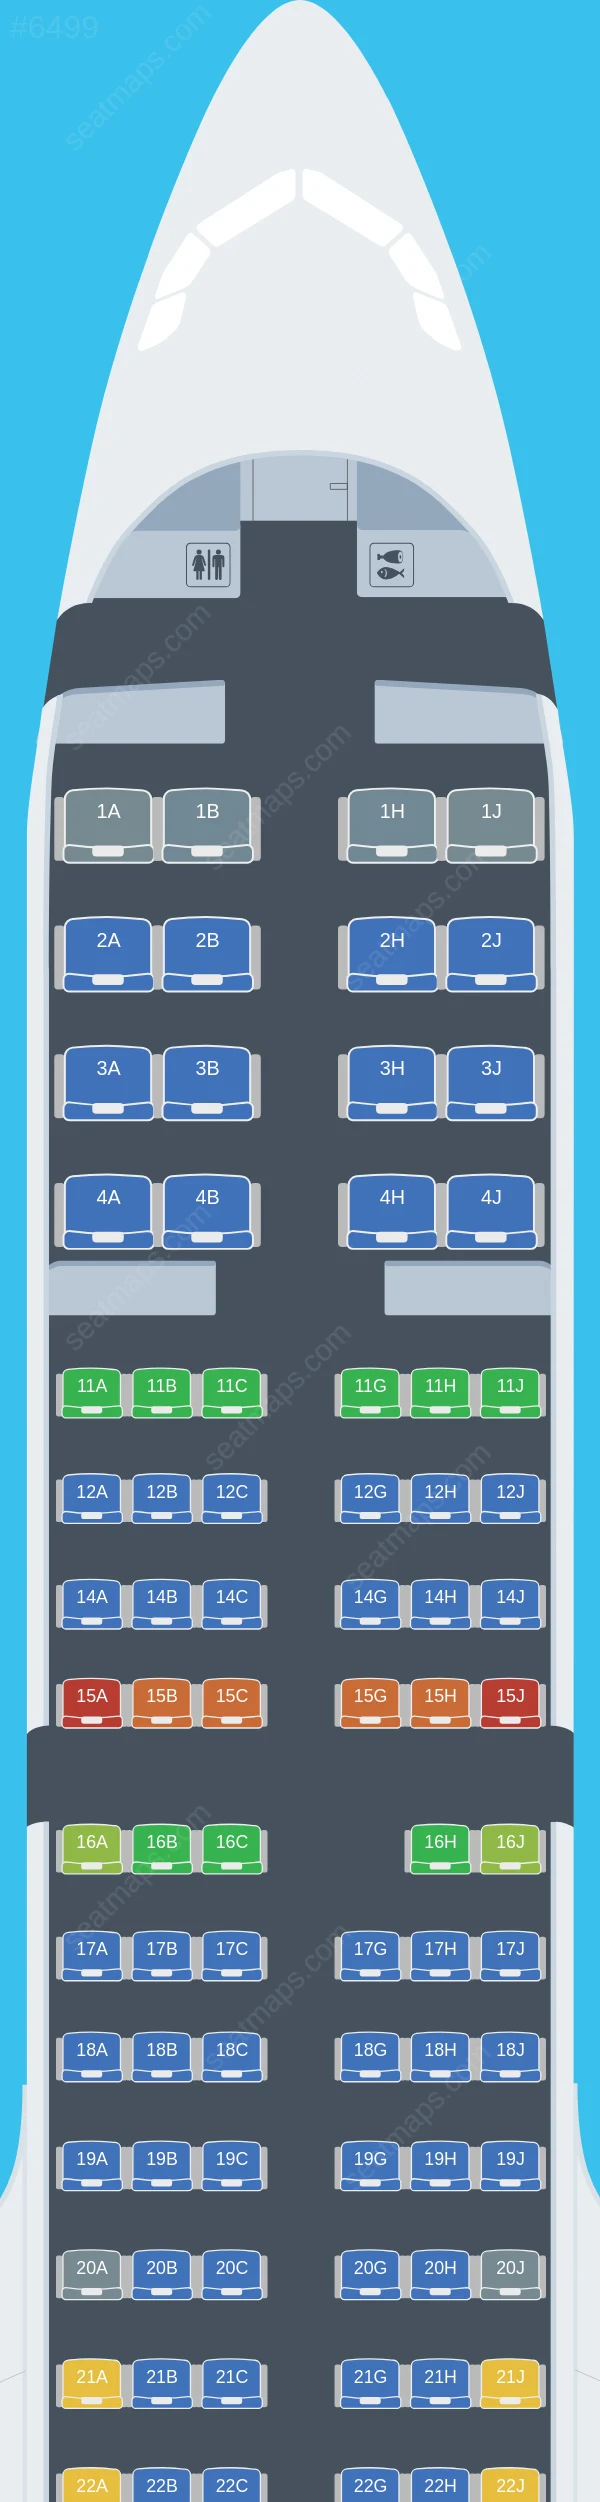 Hawaiian Airlines Airbus A321neo seatmap preview